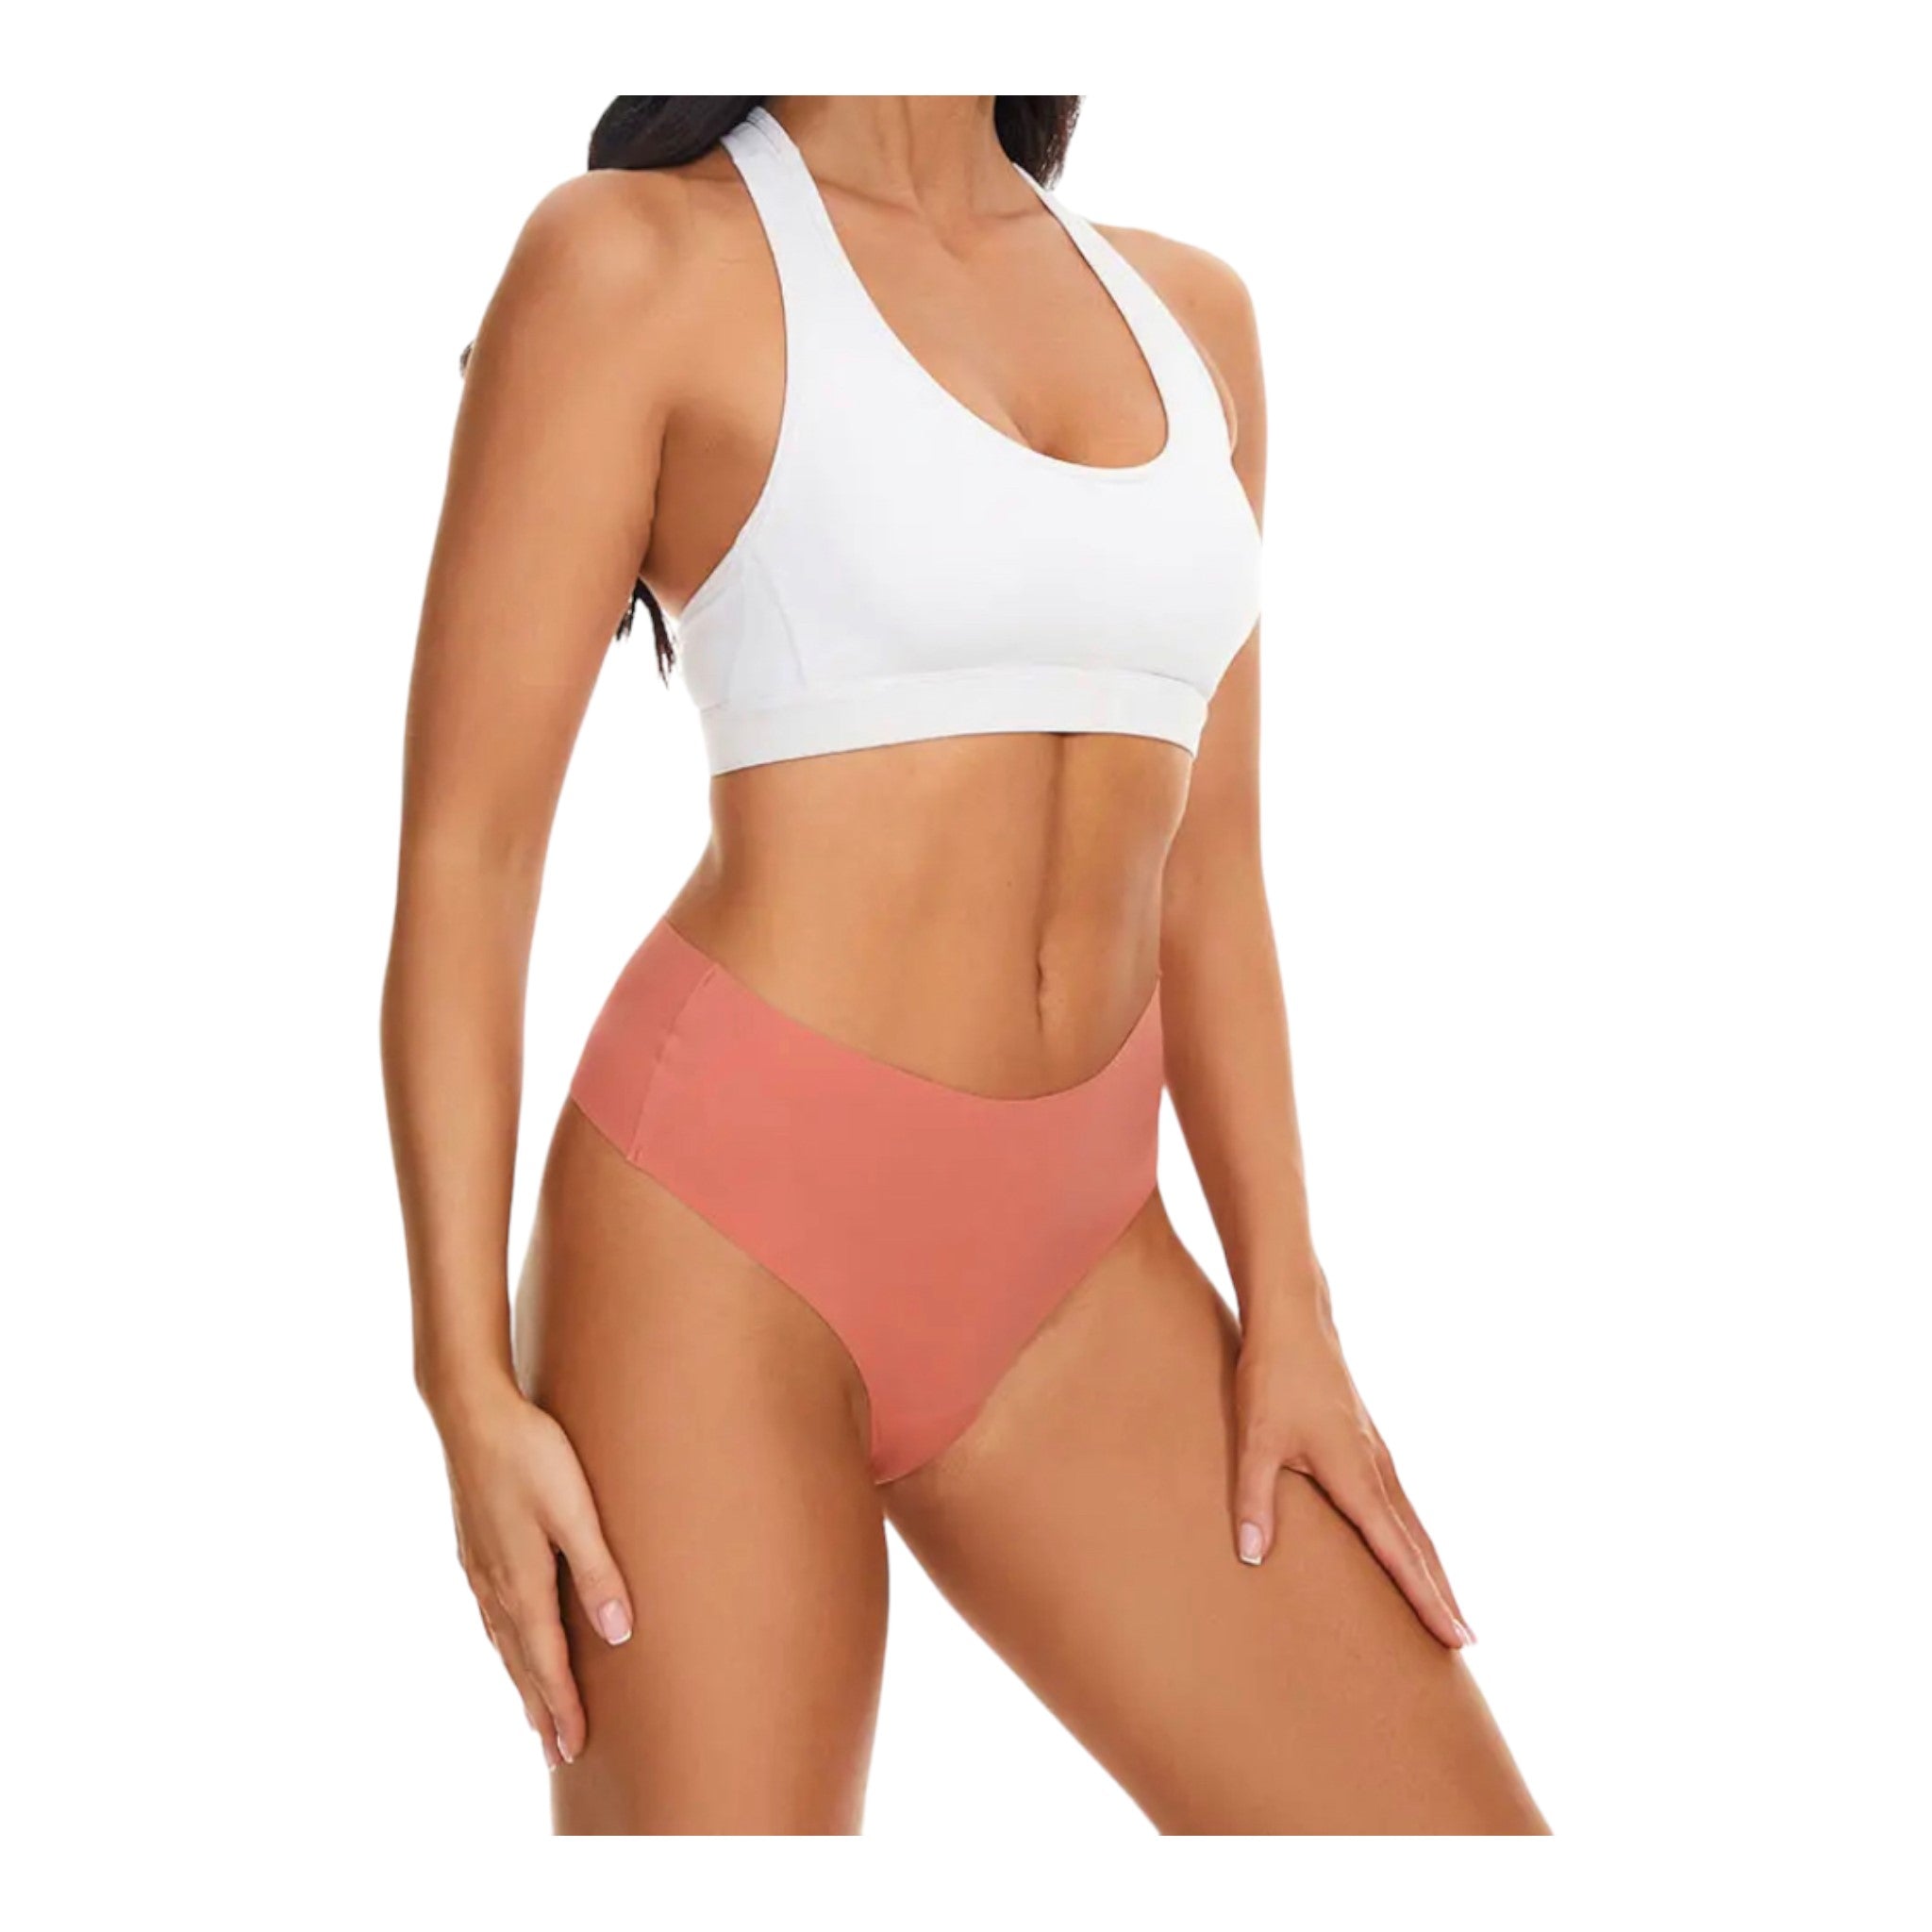 Out From Under Underwear - Women - 263 products